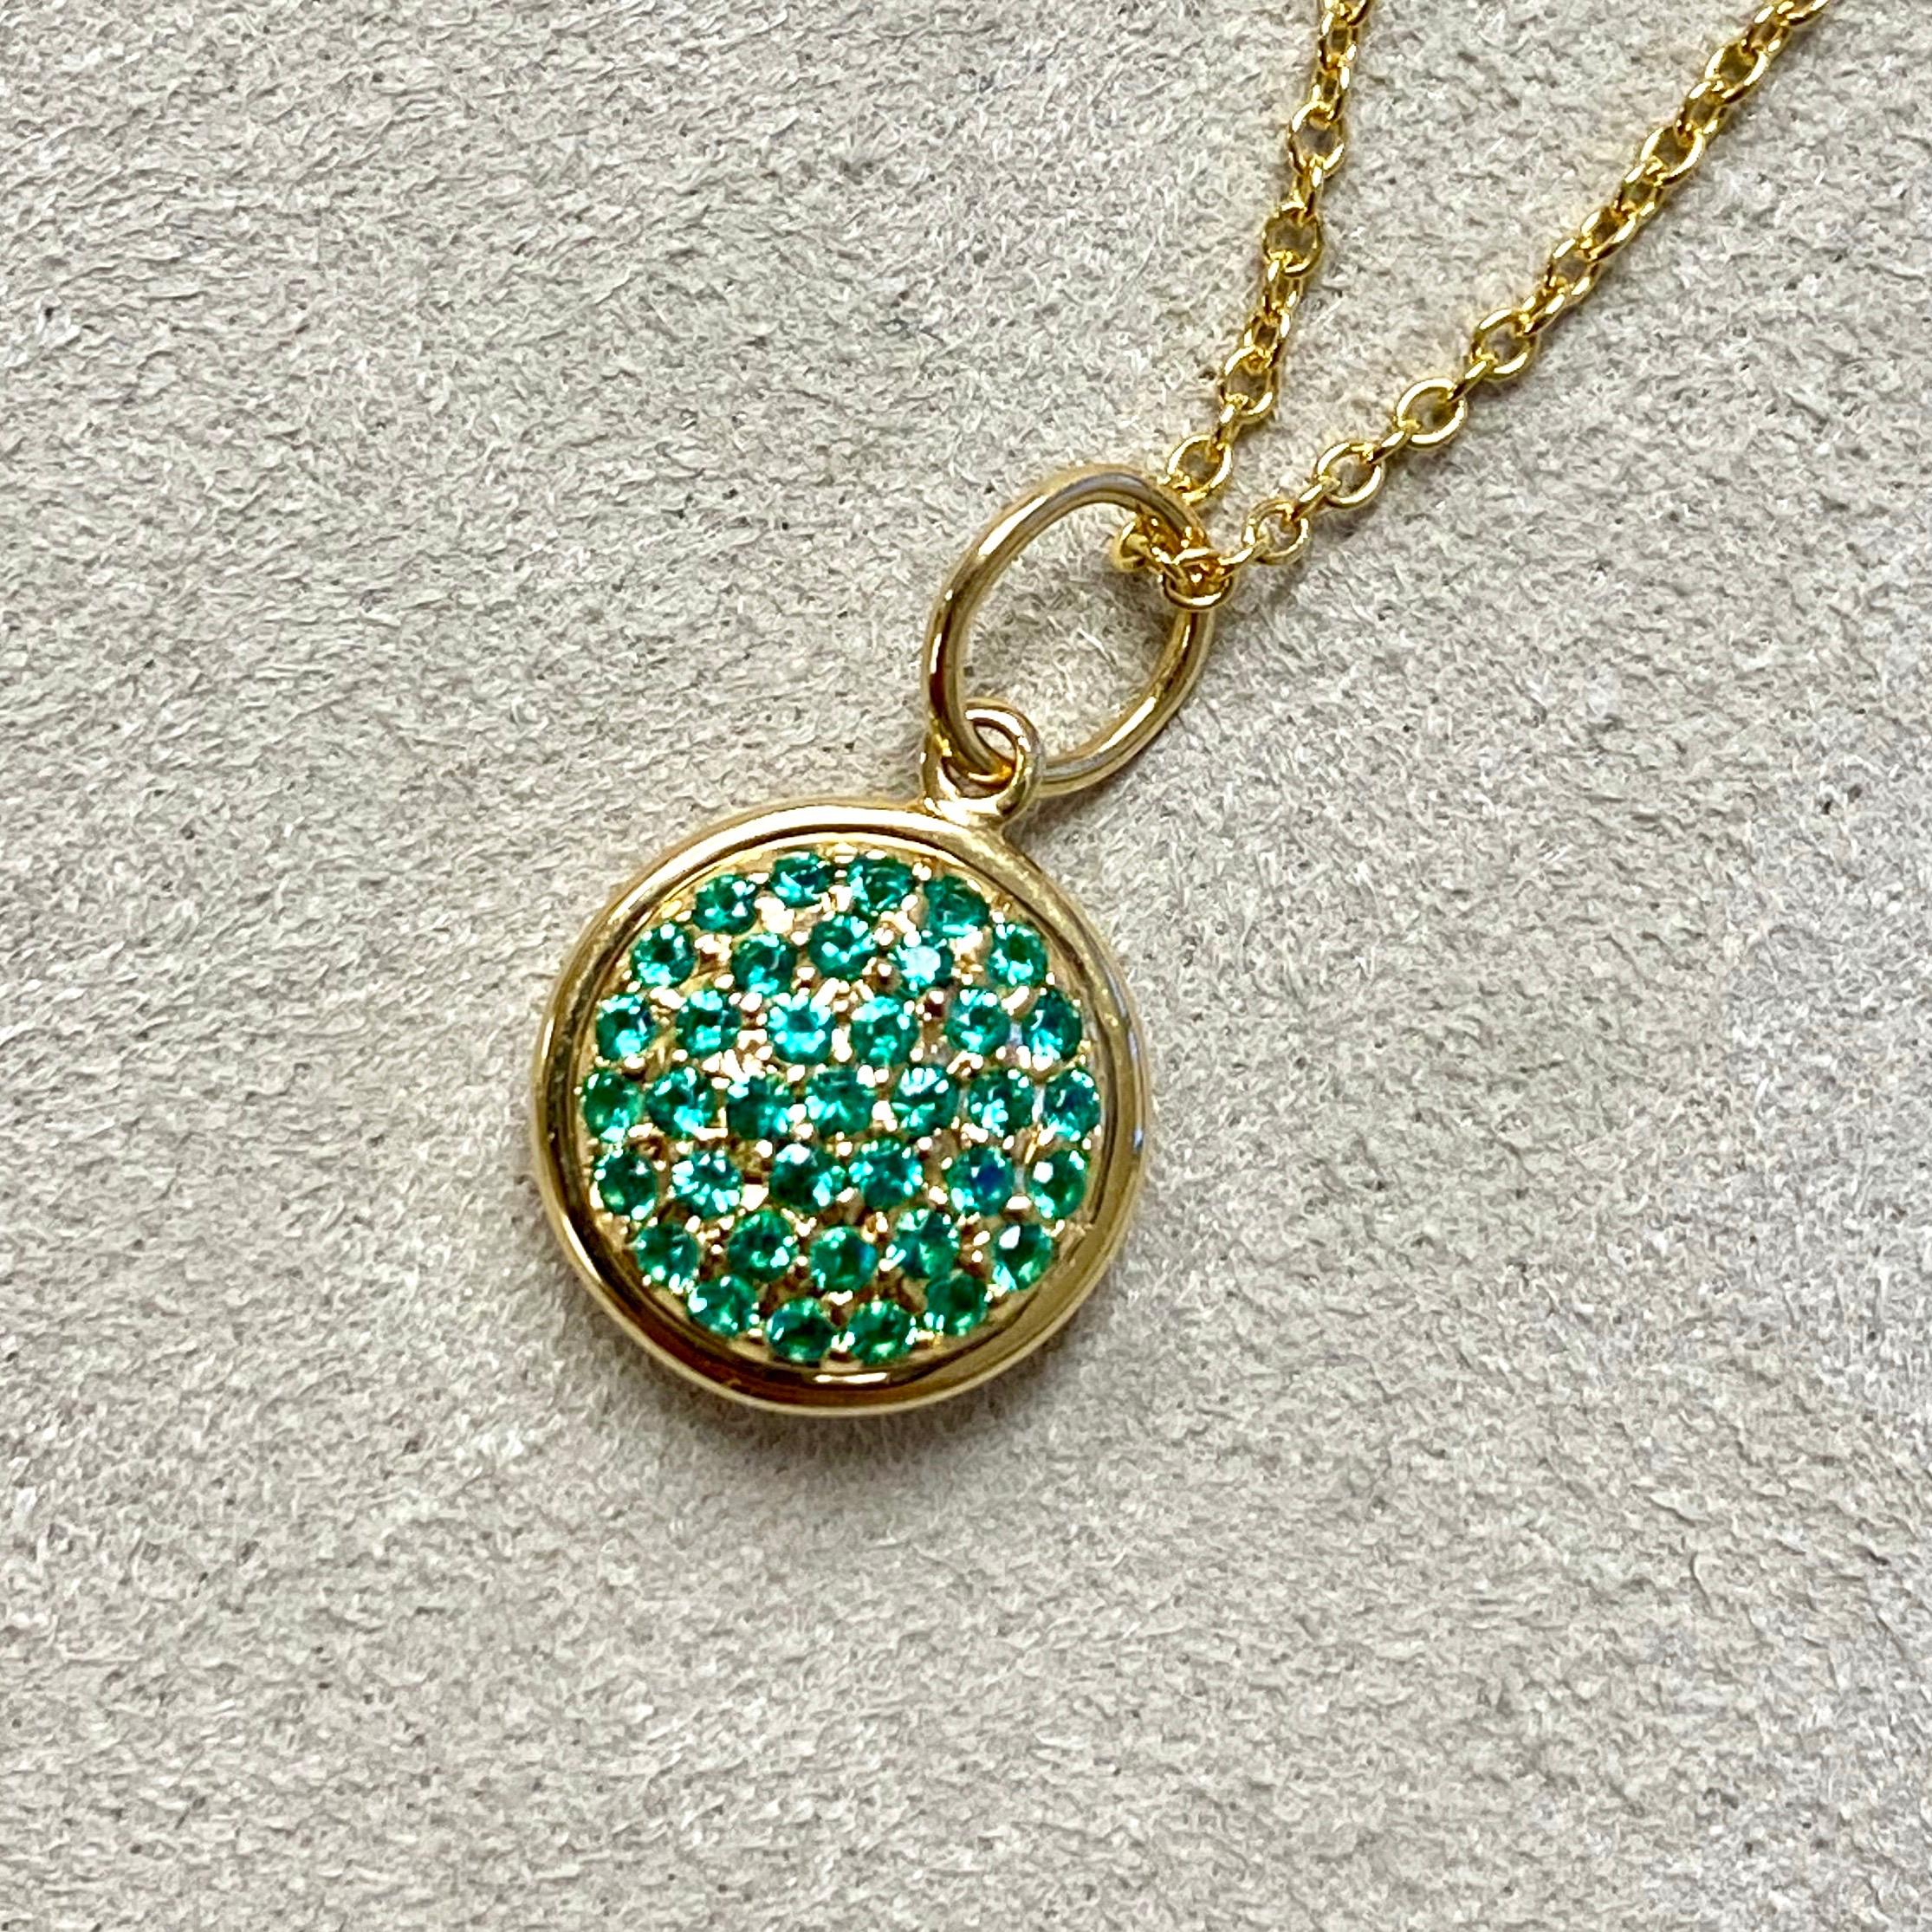 Created in 18 karat yellow gold
Emerald 0.30 ct approx
May birthstone
Chain sold separately

Exquisitely crafted in 18k yellow gold, this pendant showcases a stunning emerald with an estimated carat weight of 0.30. Representing the May birthstone,